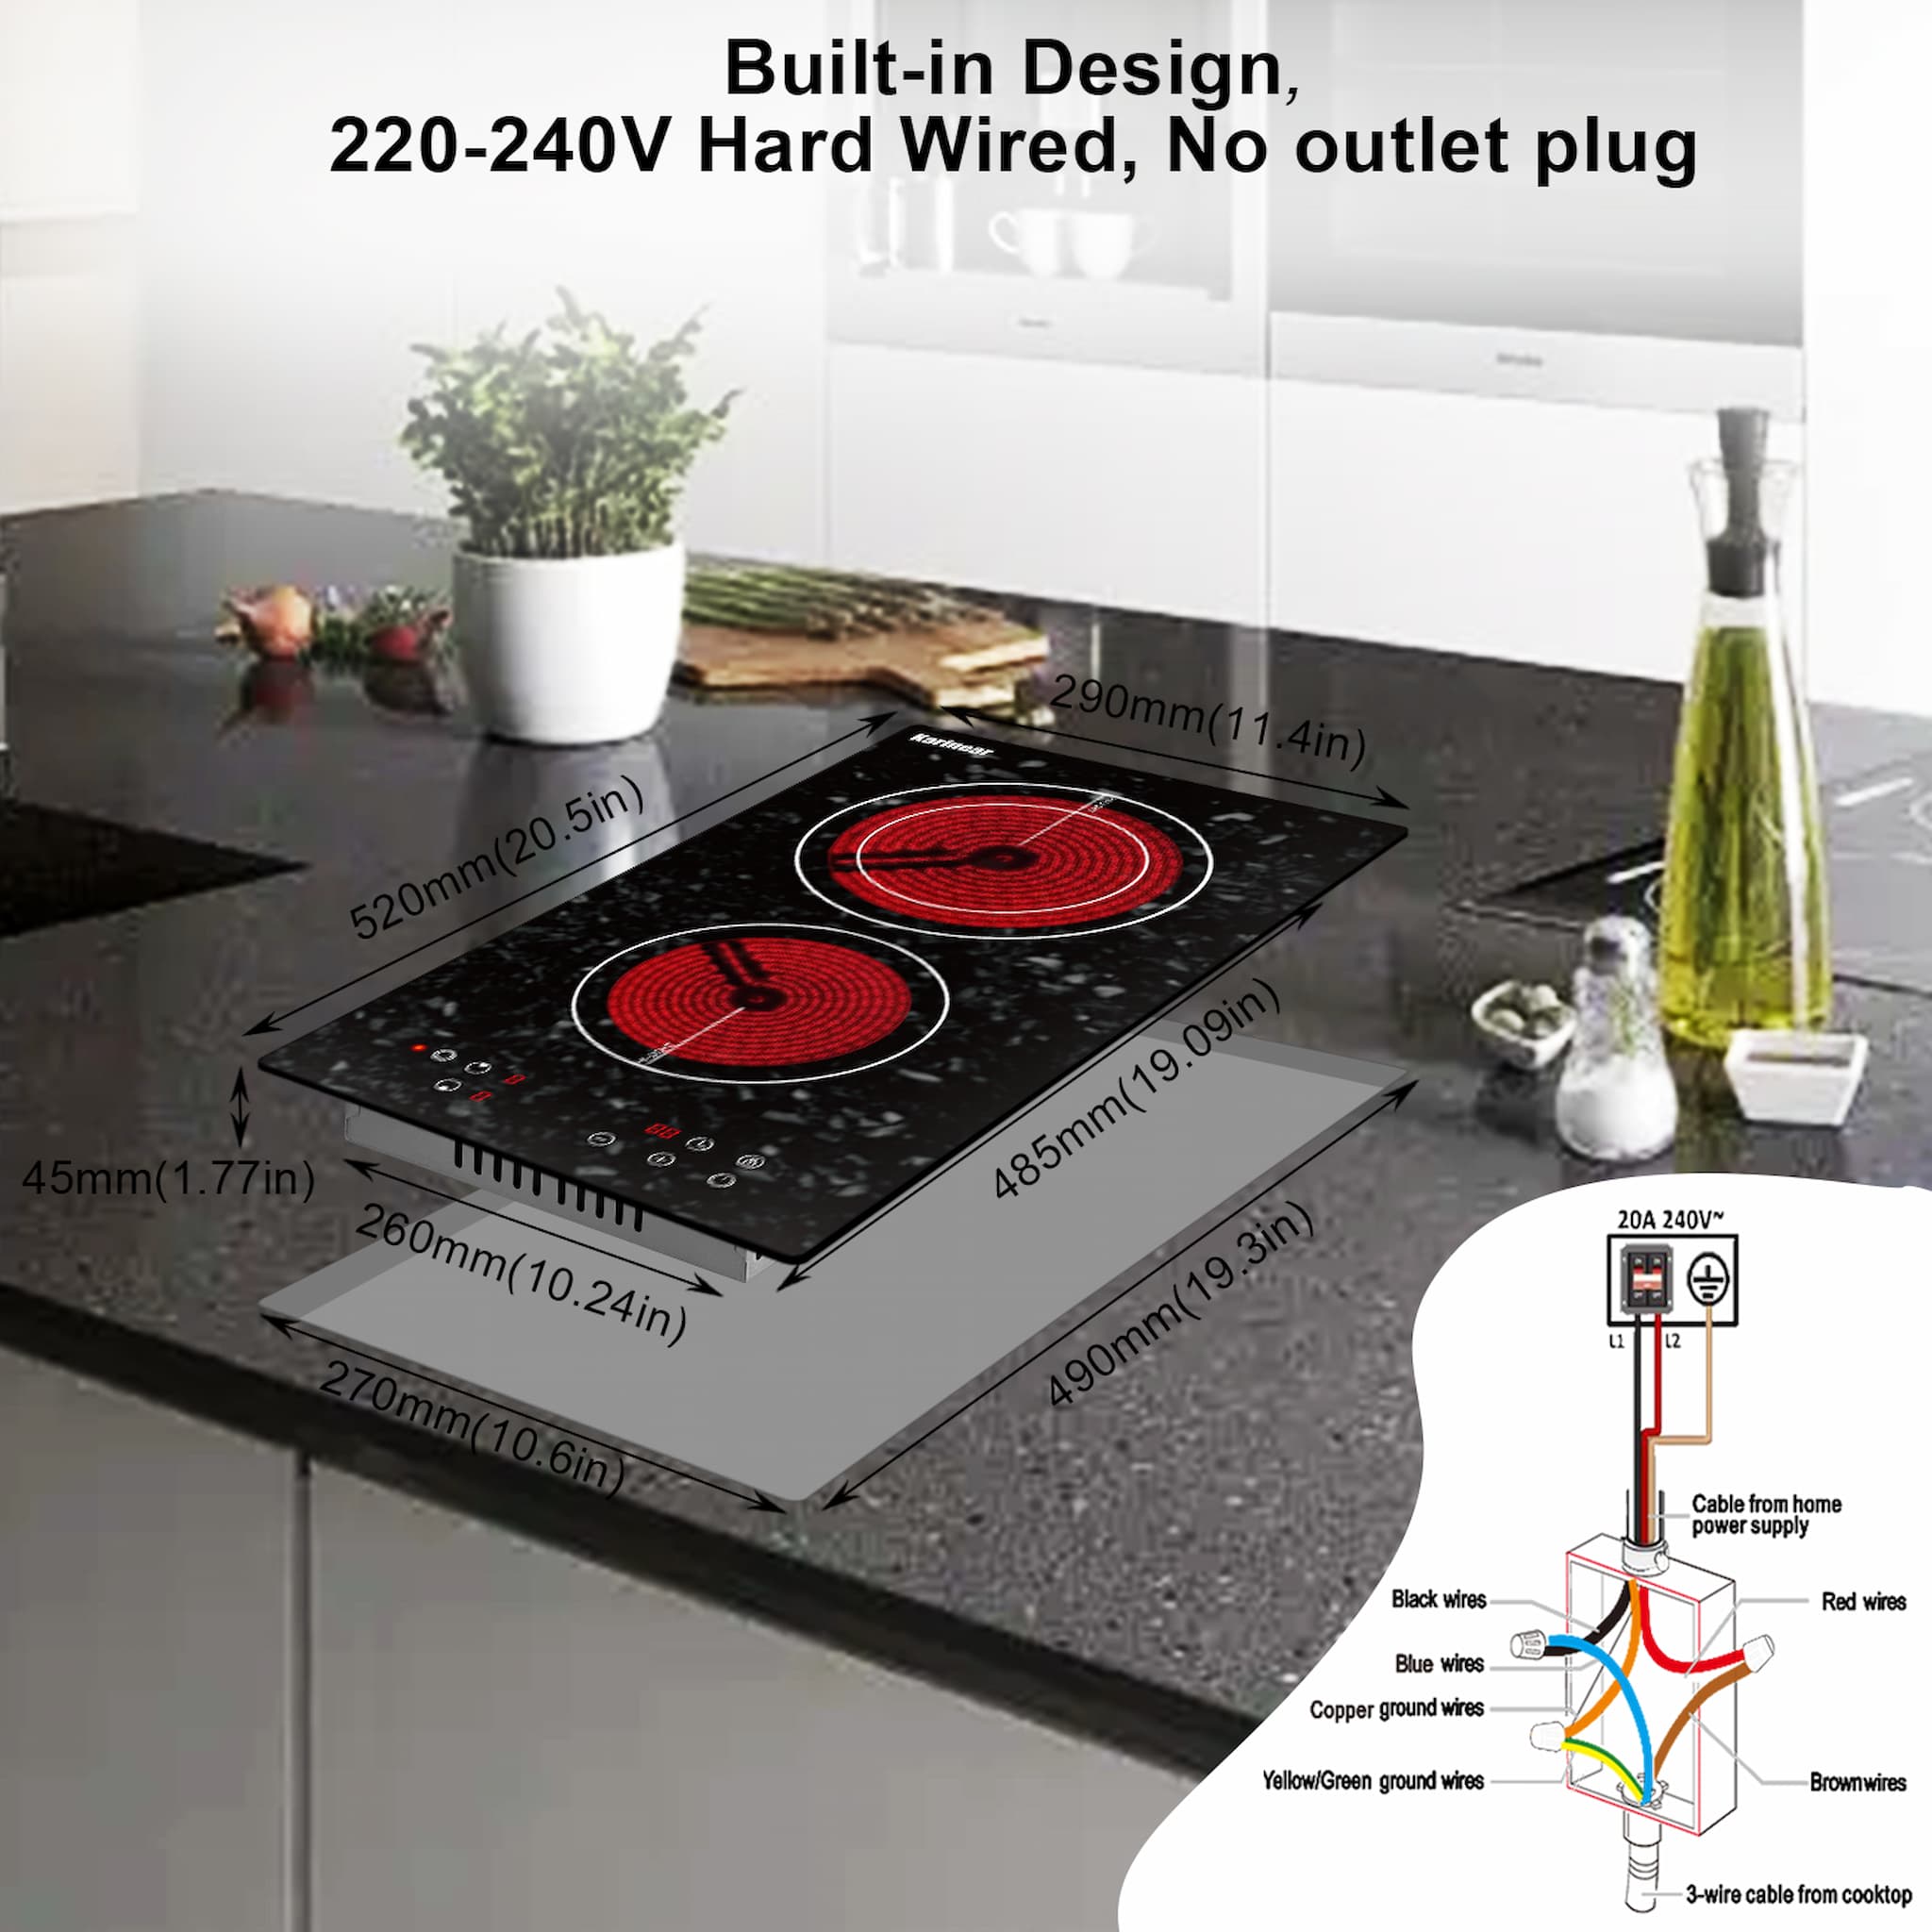 Karinear 2 Burners Electric Cooktop, 120v Plug in Ceramic Cooktop, 12 Inch  Countertop & Built-in Electric Stove Top with Child Safety Lock, Timer